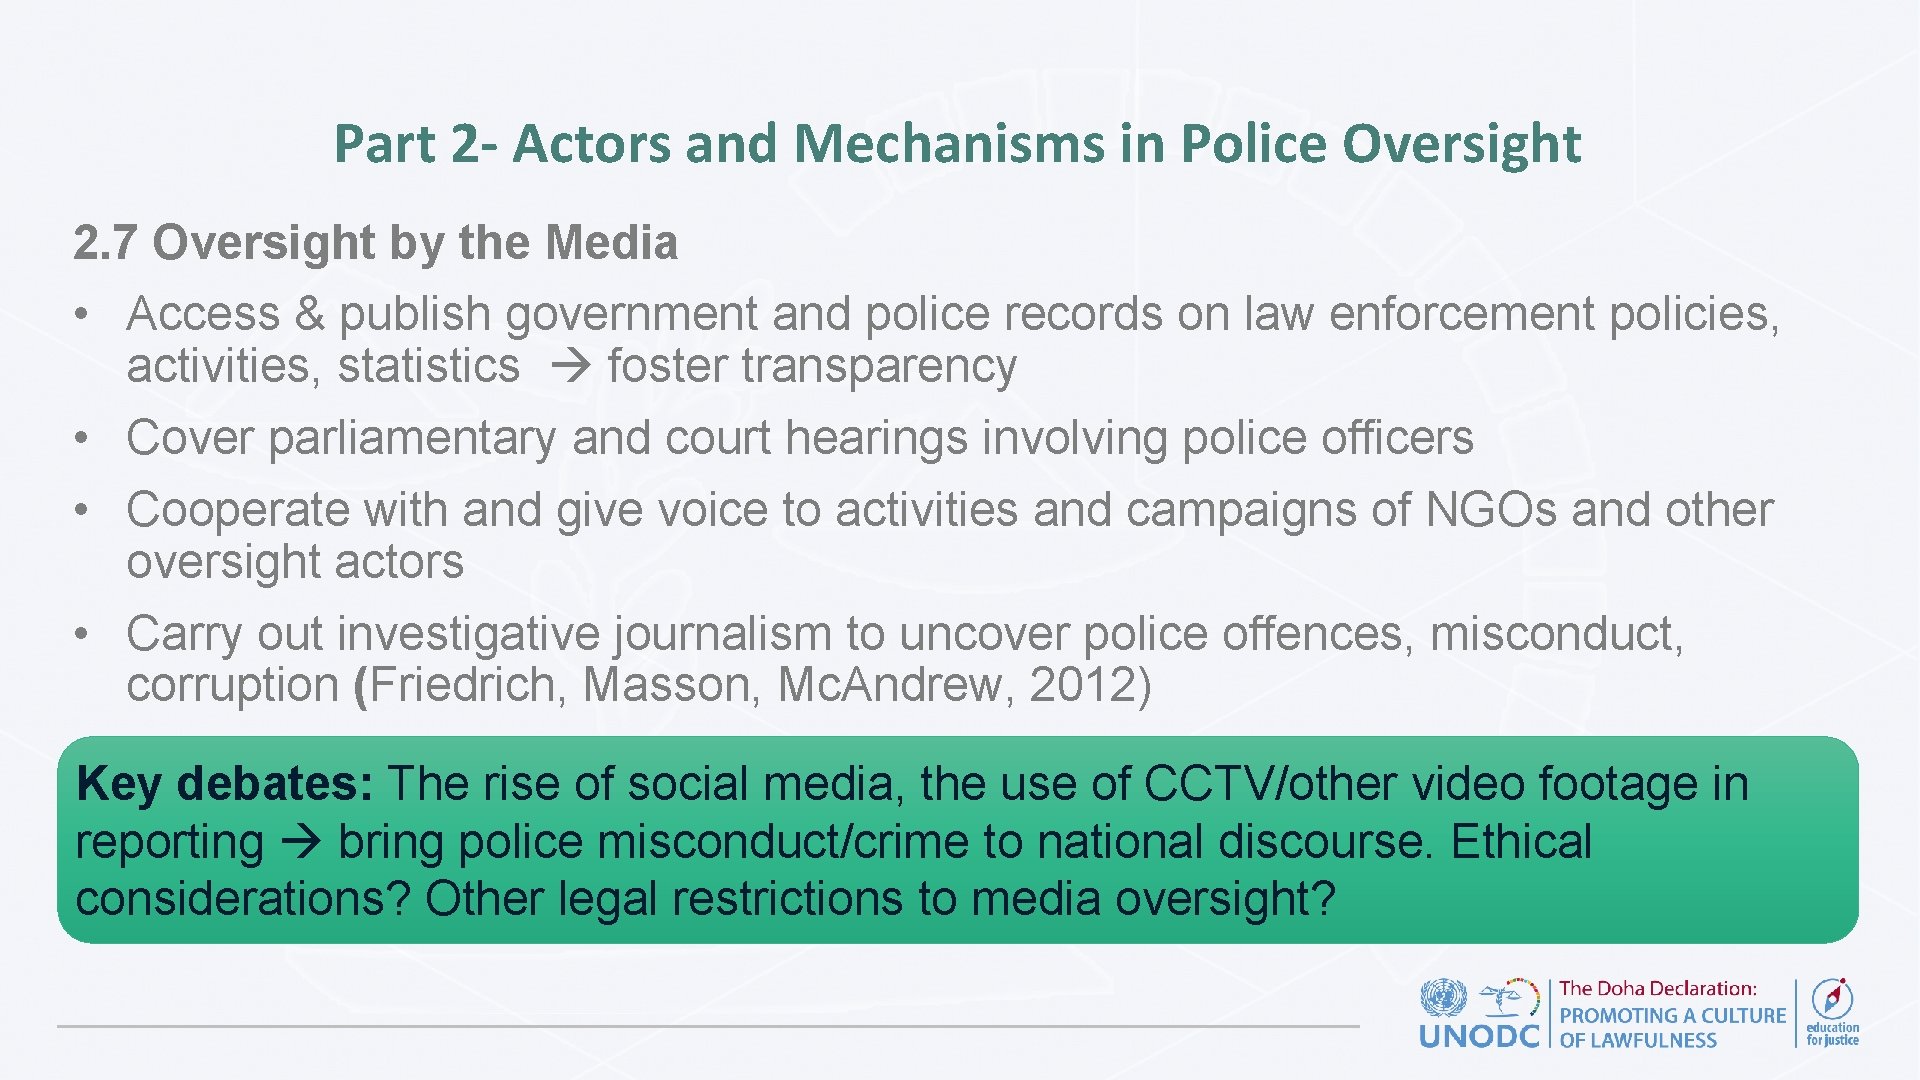 Part 2 - Actors and Mechanisms in Police Oversight 2. 7 Oversight by the